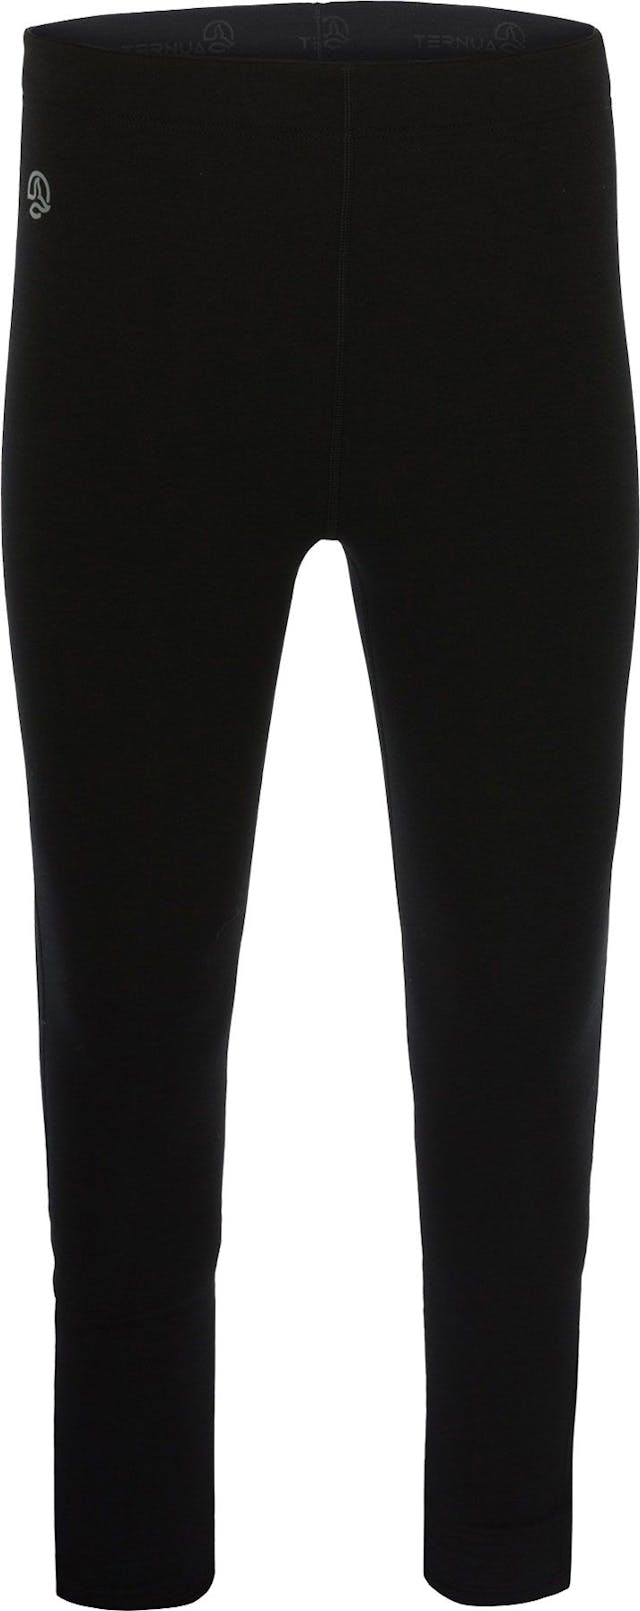 Product image for Camp Tights - Men's